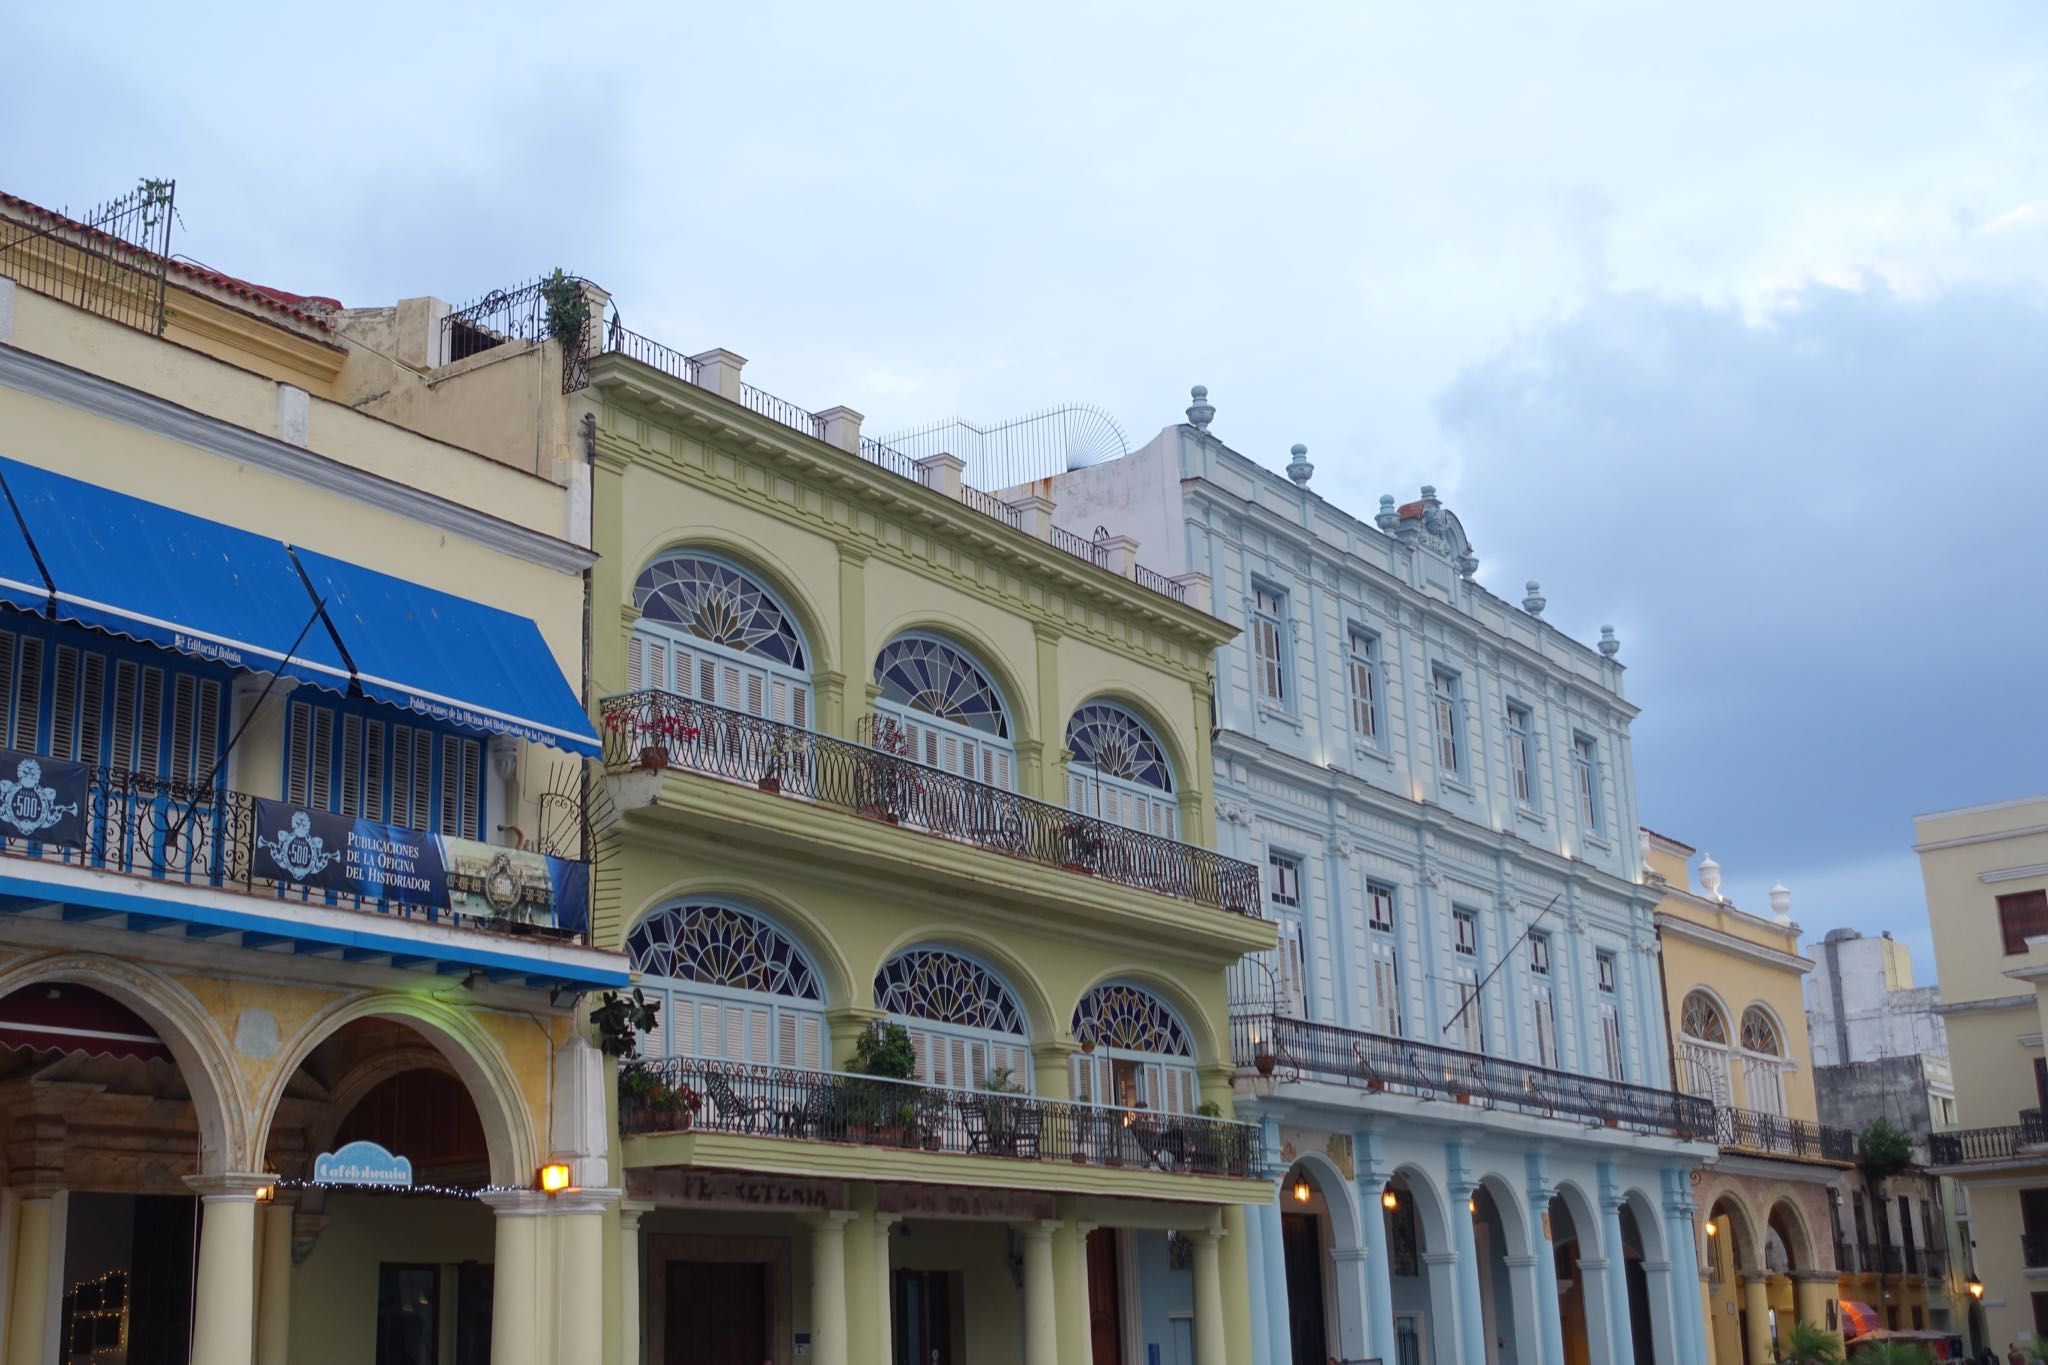 Photo 127 of 221 from the album Highlights Cuba 2019.